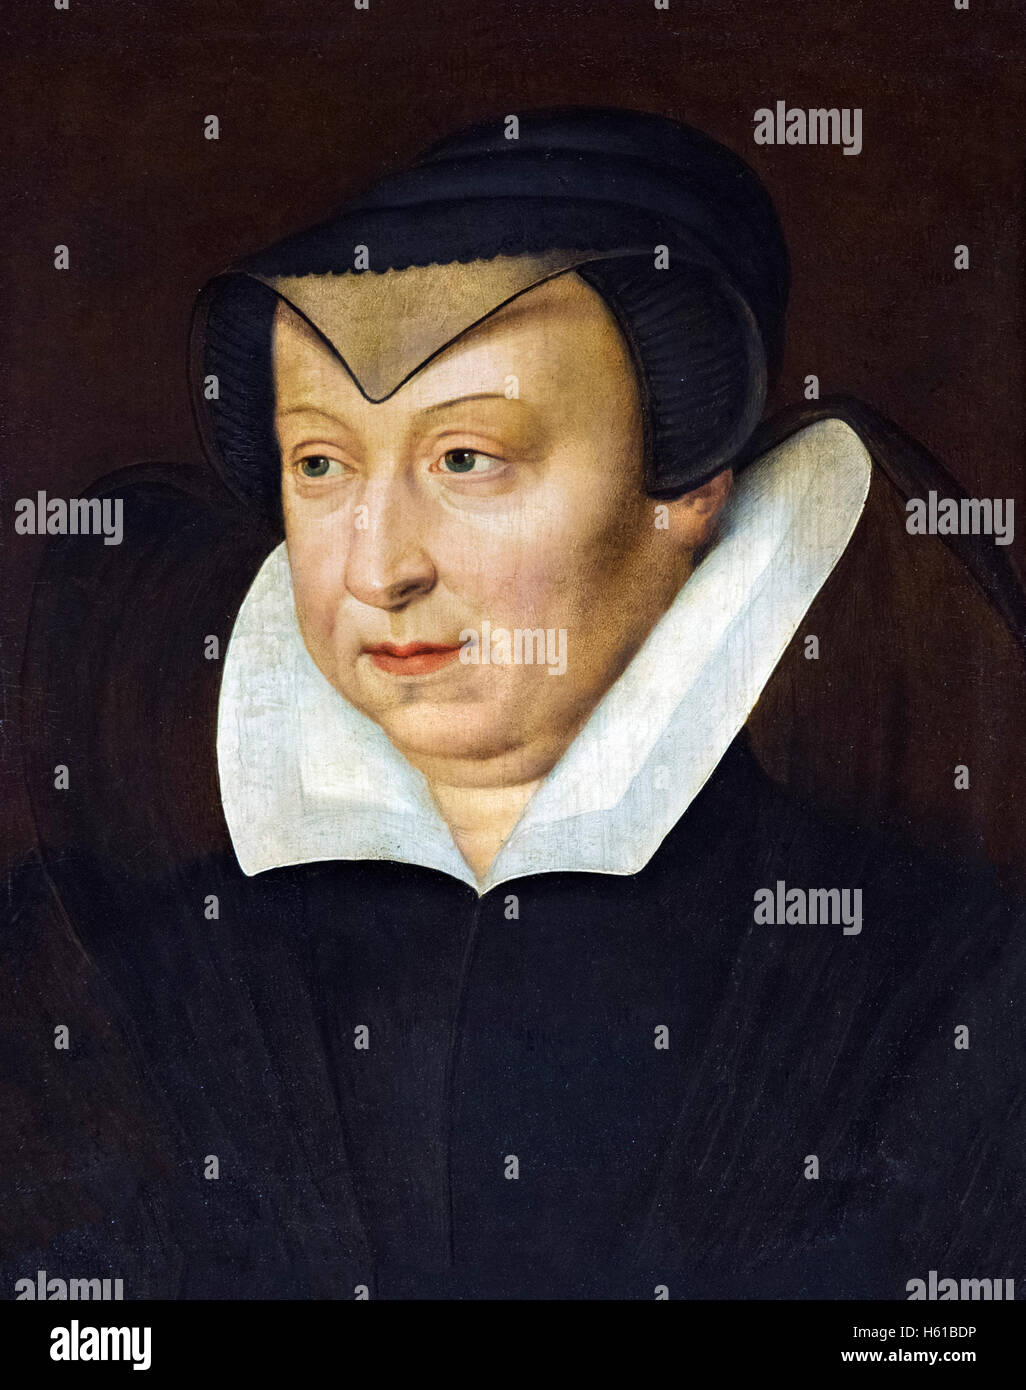 Catherine de Medici (Catherine de Médicis:1519-1589), Queen of France from 1547 until 1559, as the wife of King Henry II. Portrait c.1580 by unknown artist, oil on oak panel. Stock Photo